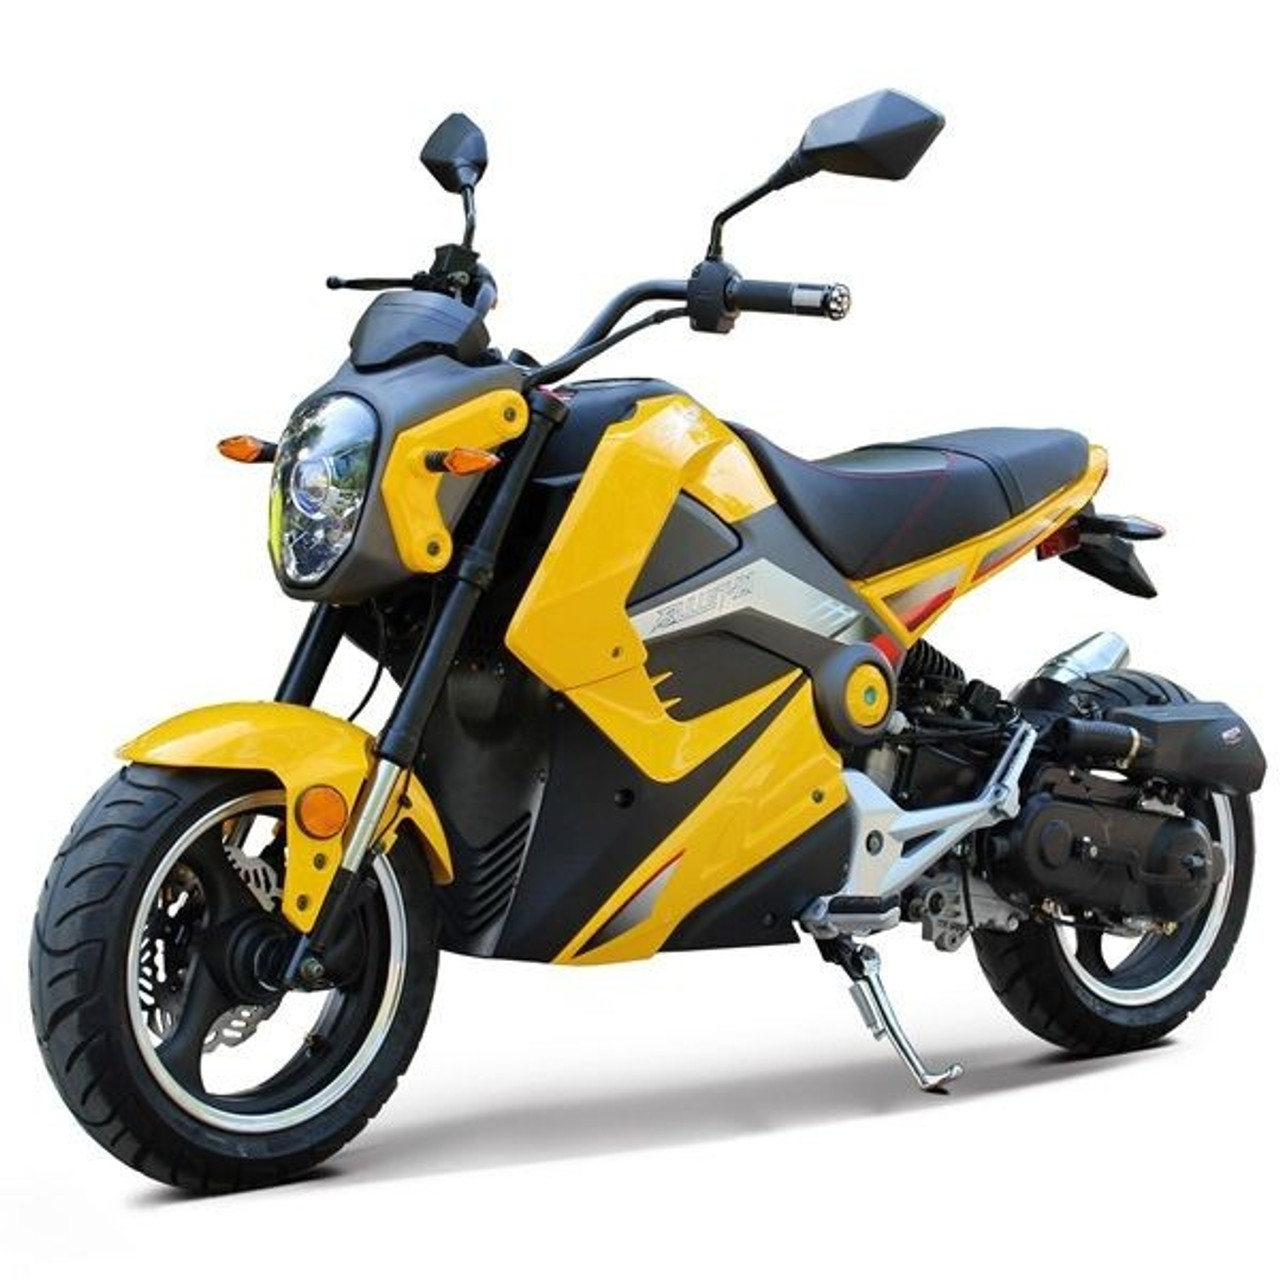 DongFang DF STT 50cc Gas Motorcycle With CVT Auto Tranny,Aluminum Wheels